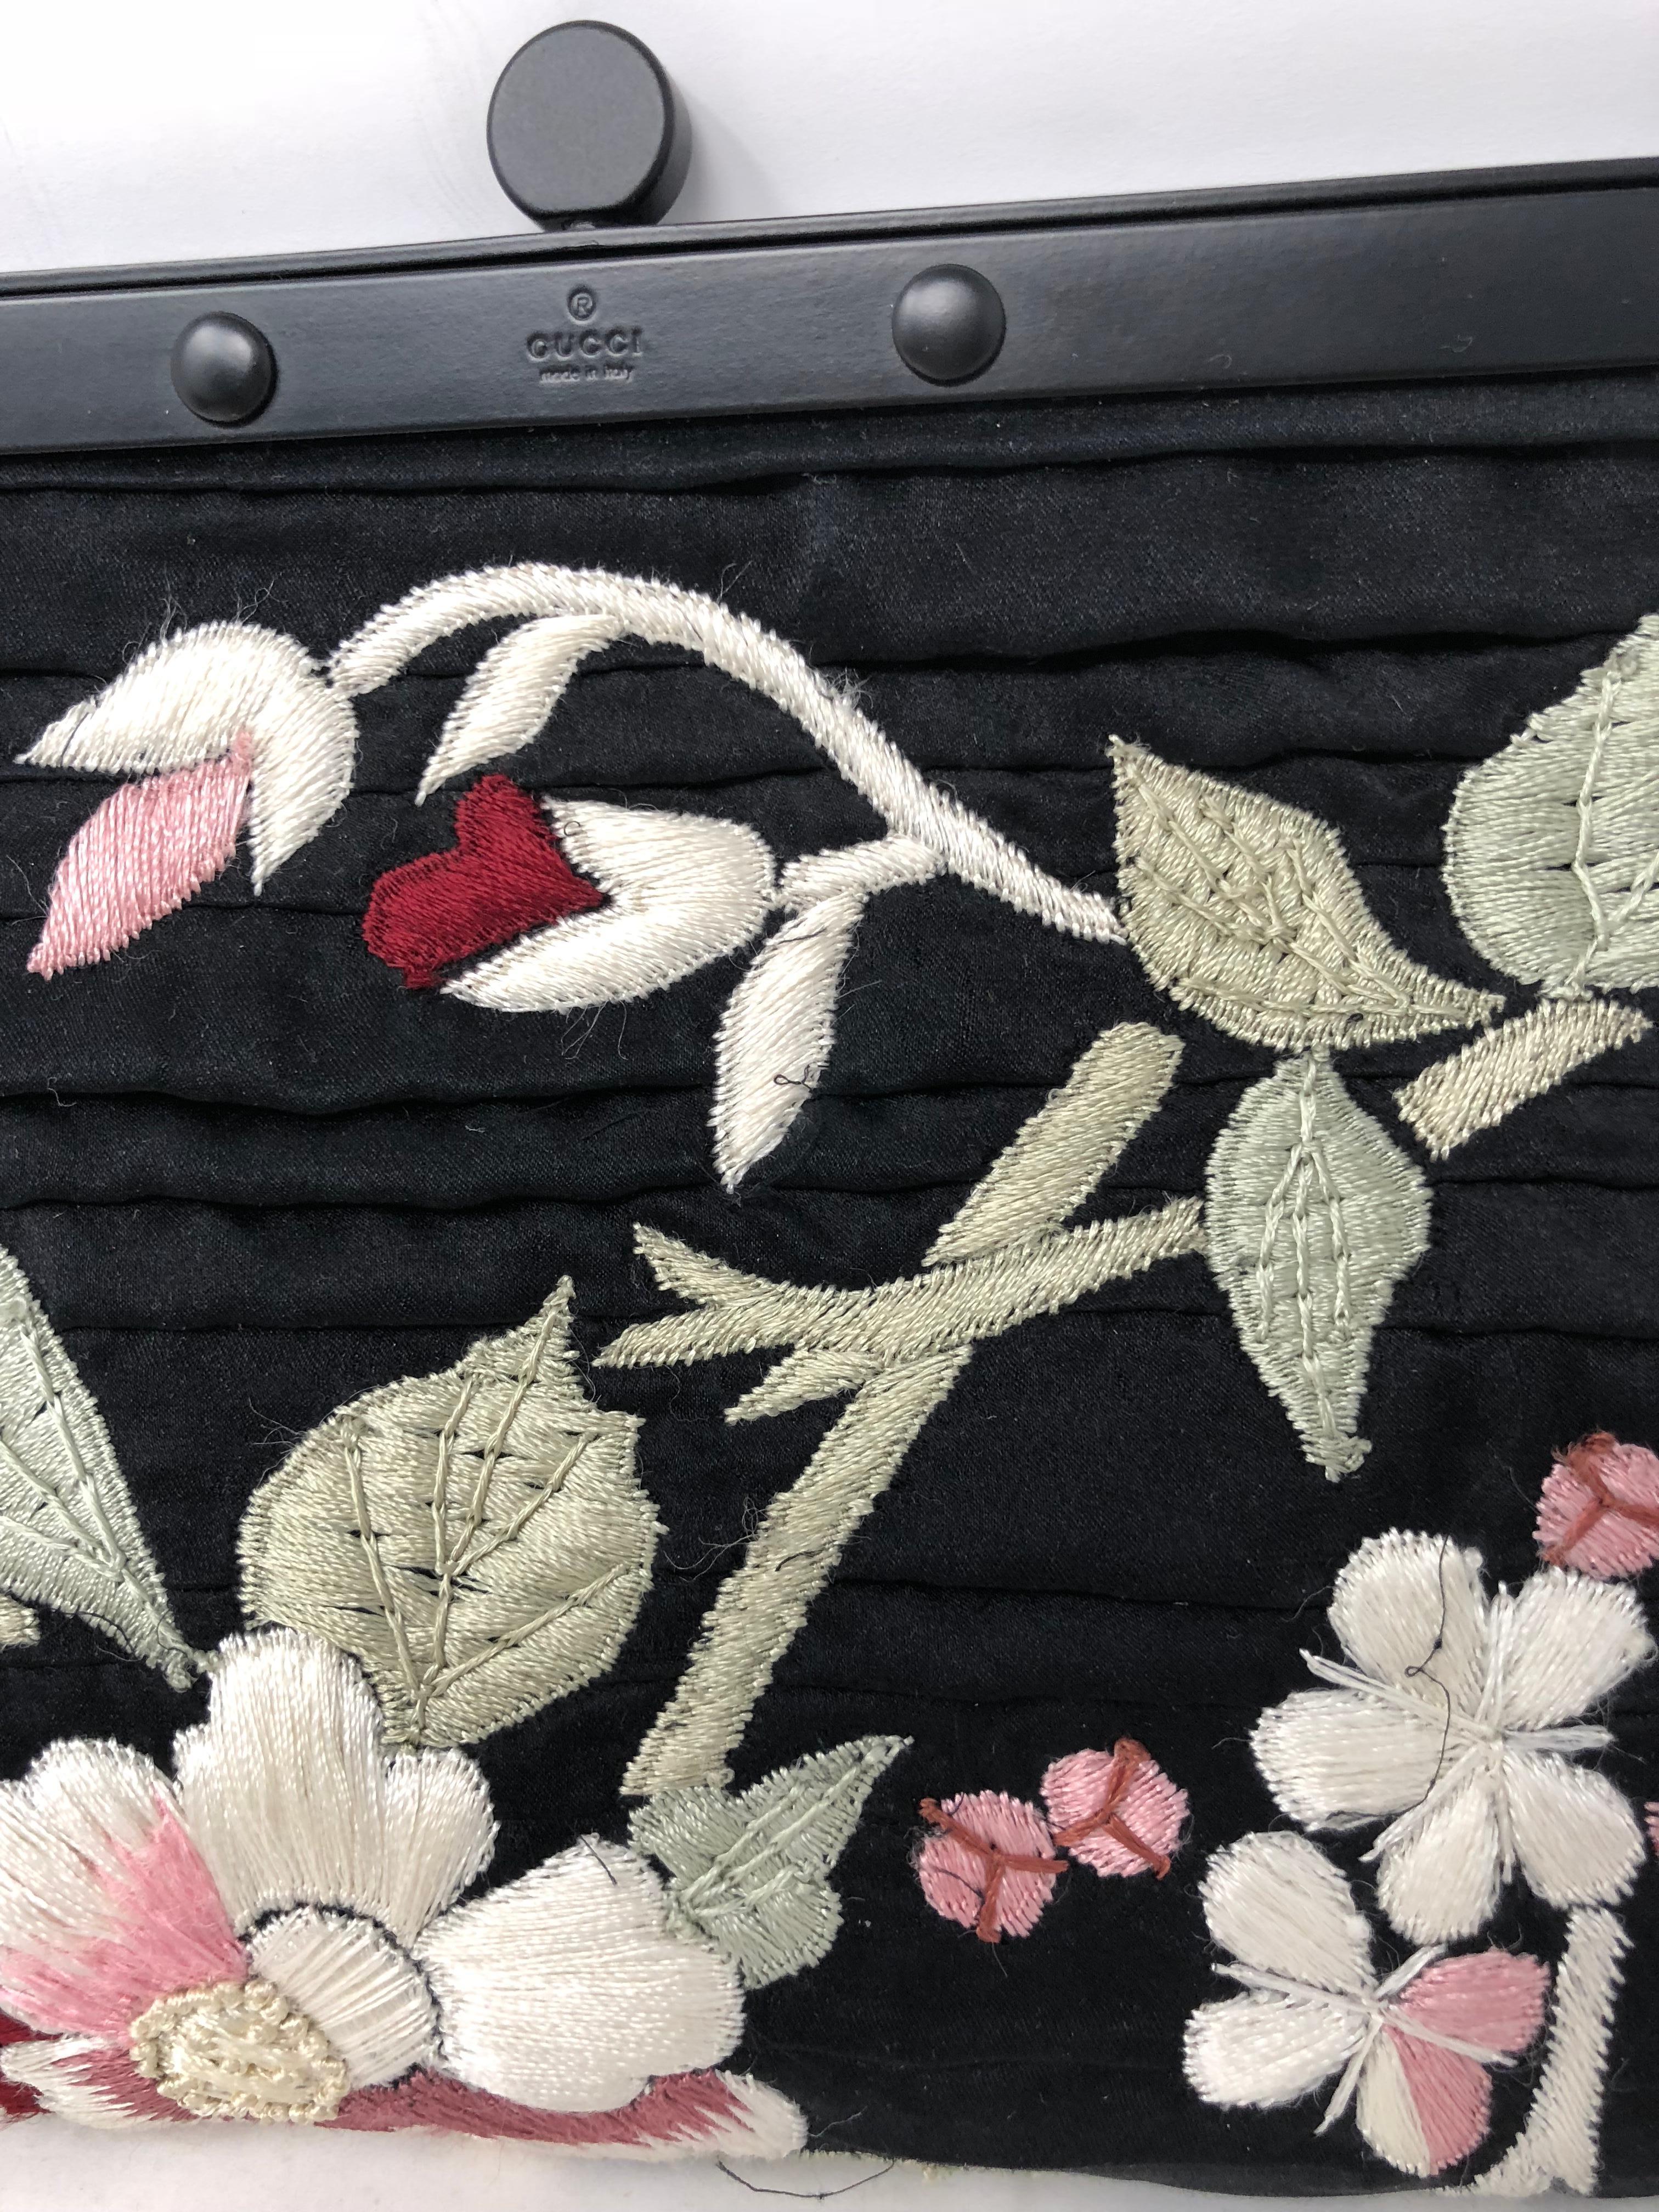 Women's or Men's Gucci embroidered Evening Bag